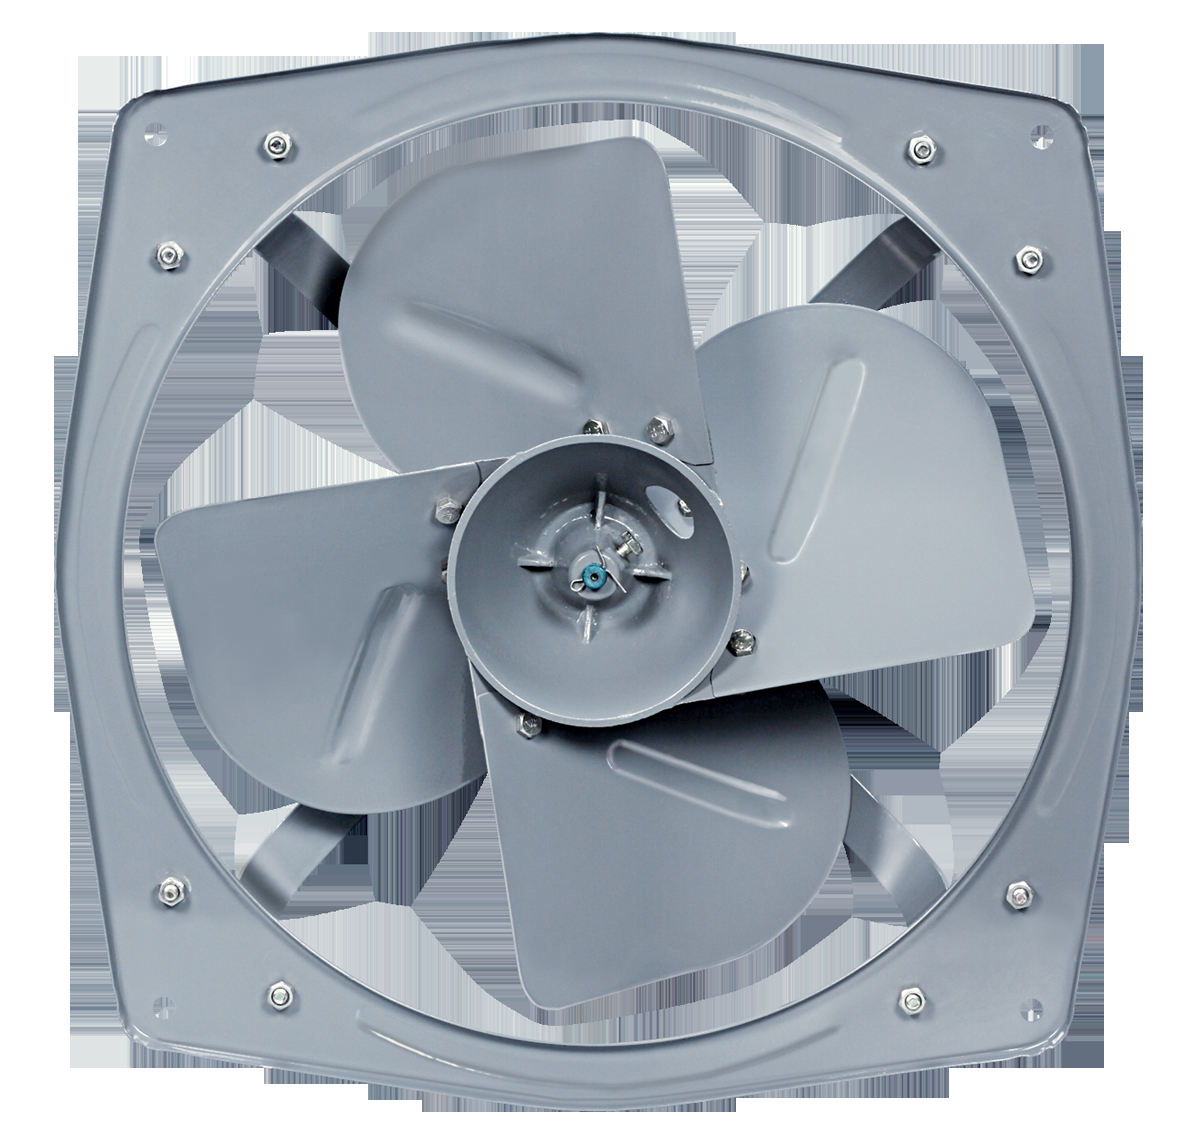 Havells Heavy Duty Exhaust Fan Turboforce 900 Rpm Havells intended for proportions 1200 X 1140